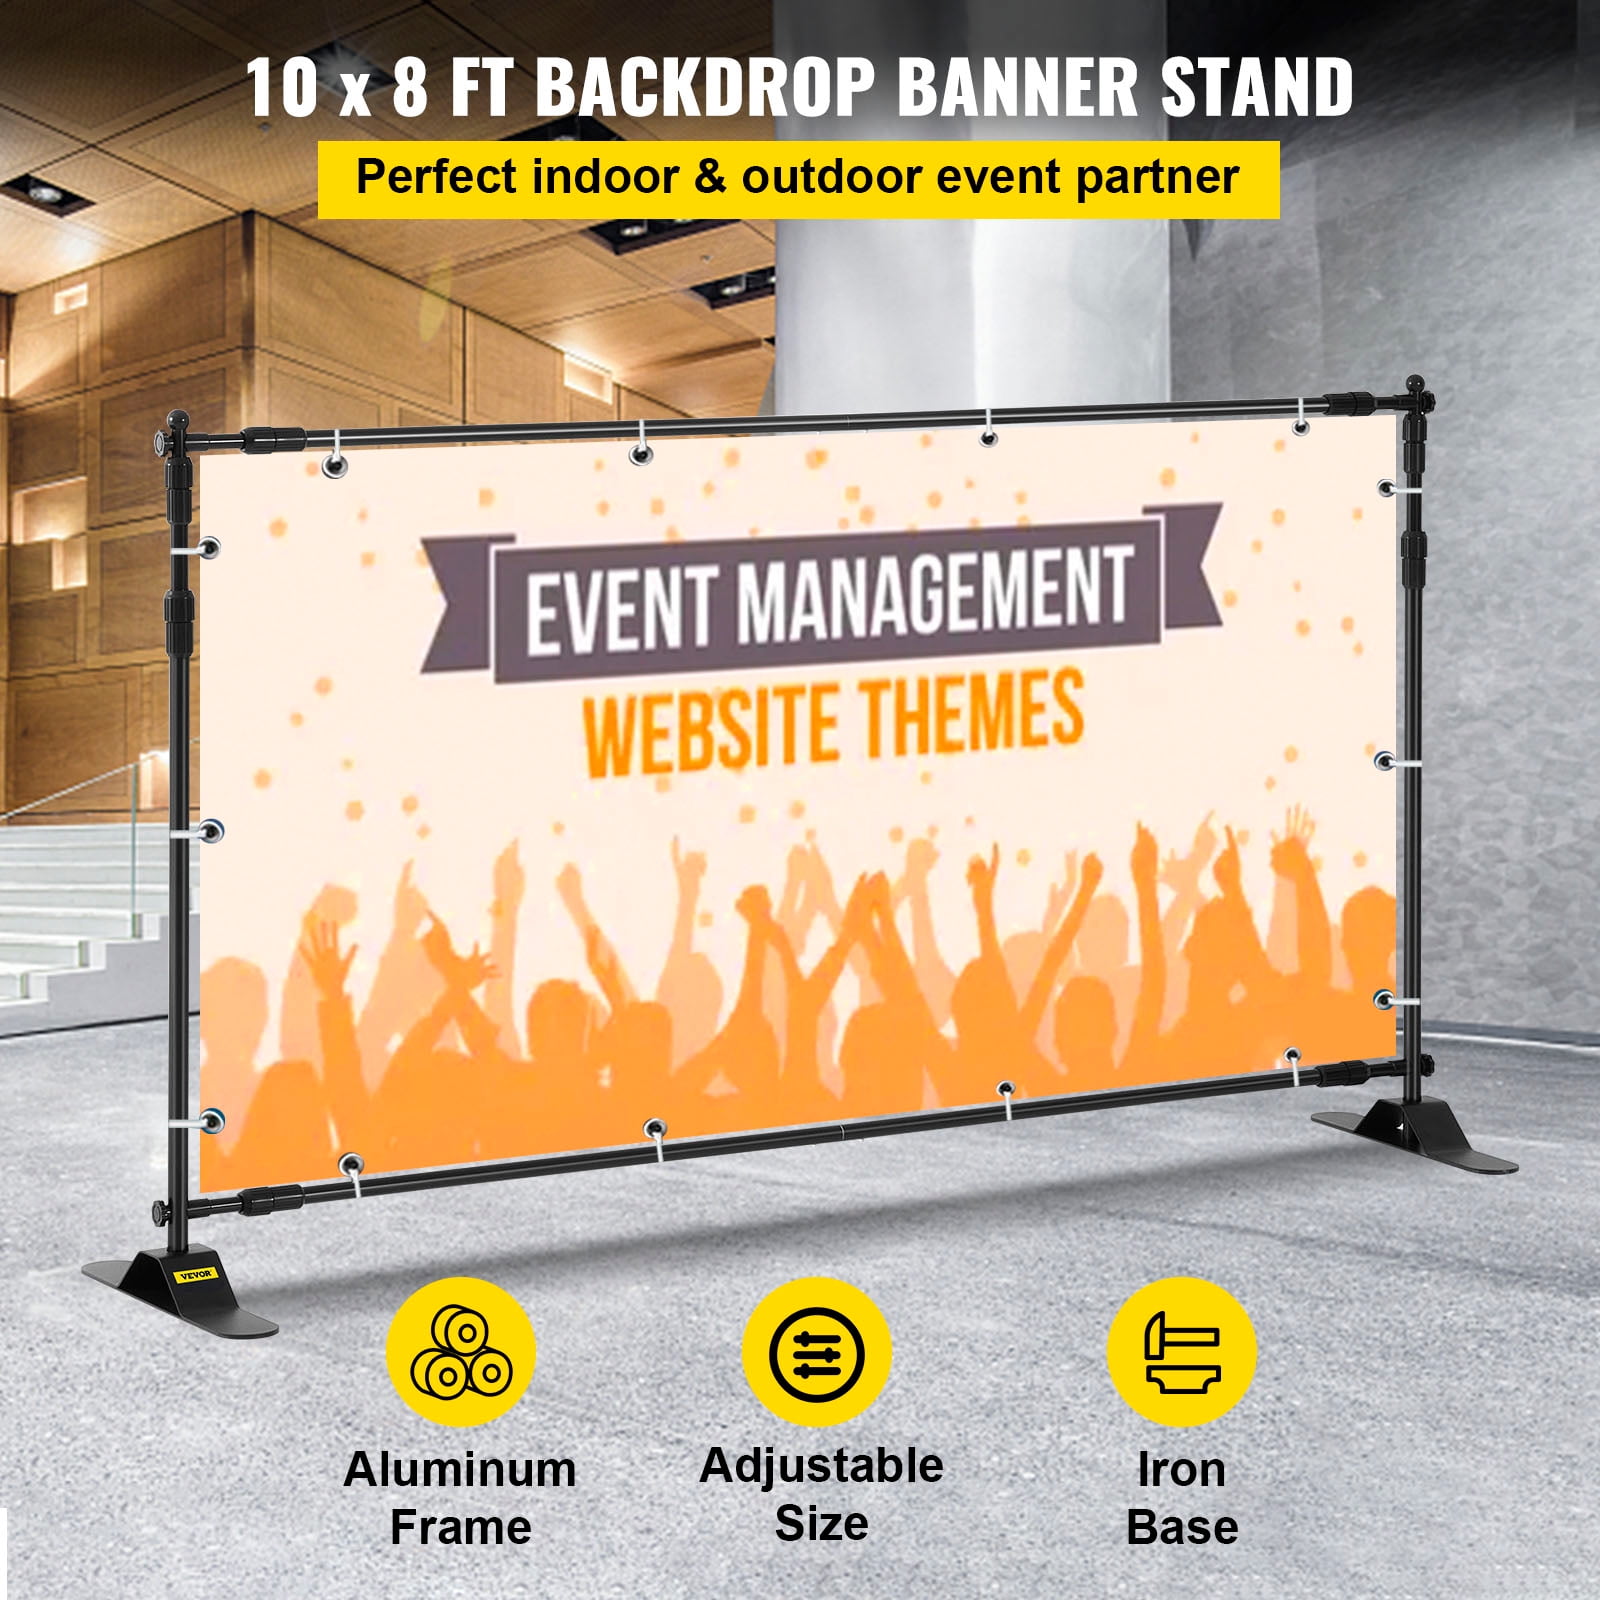 GSYXERGILES 10 x 8 Ft Backdrop Banner Stand Heavy-Duty Banner Display Support with Carrying Bag for Parties Exhibition Background Adjustable Photography Step and Repeat Stand Wedding Photoshoot 